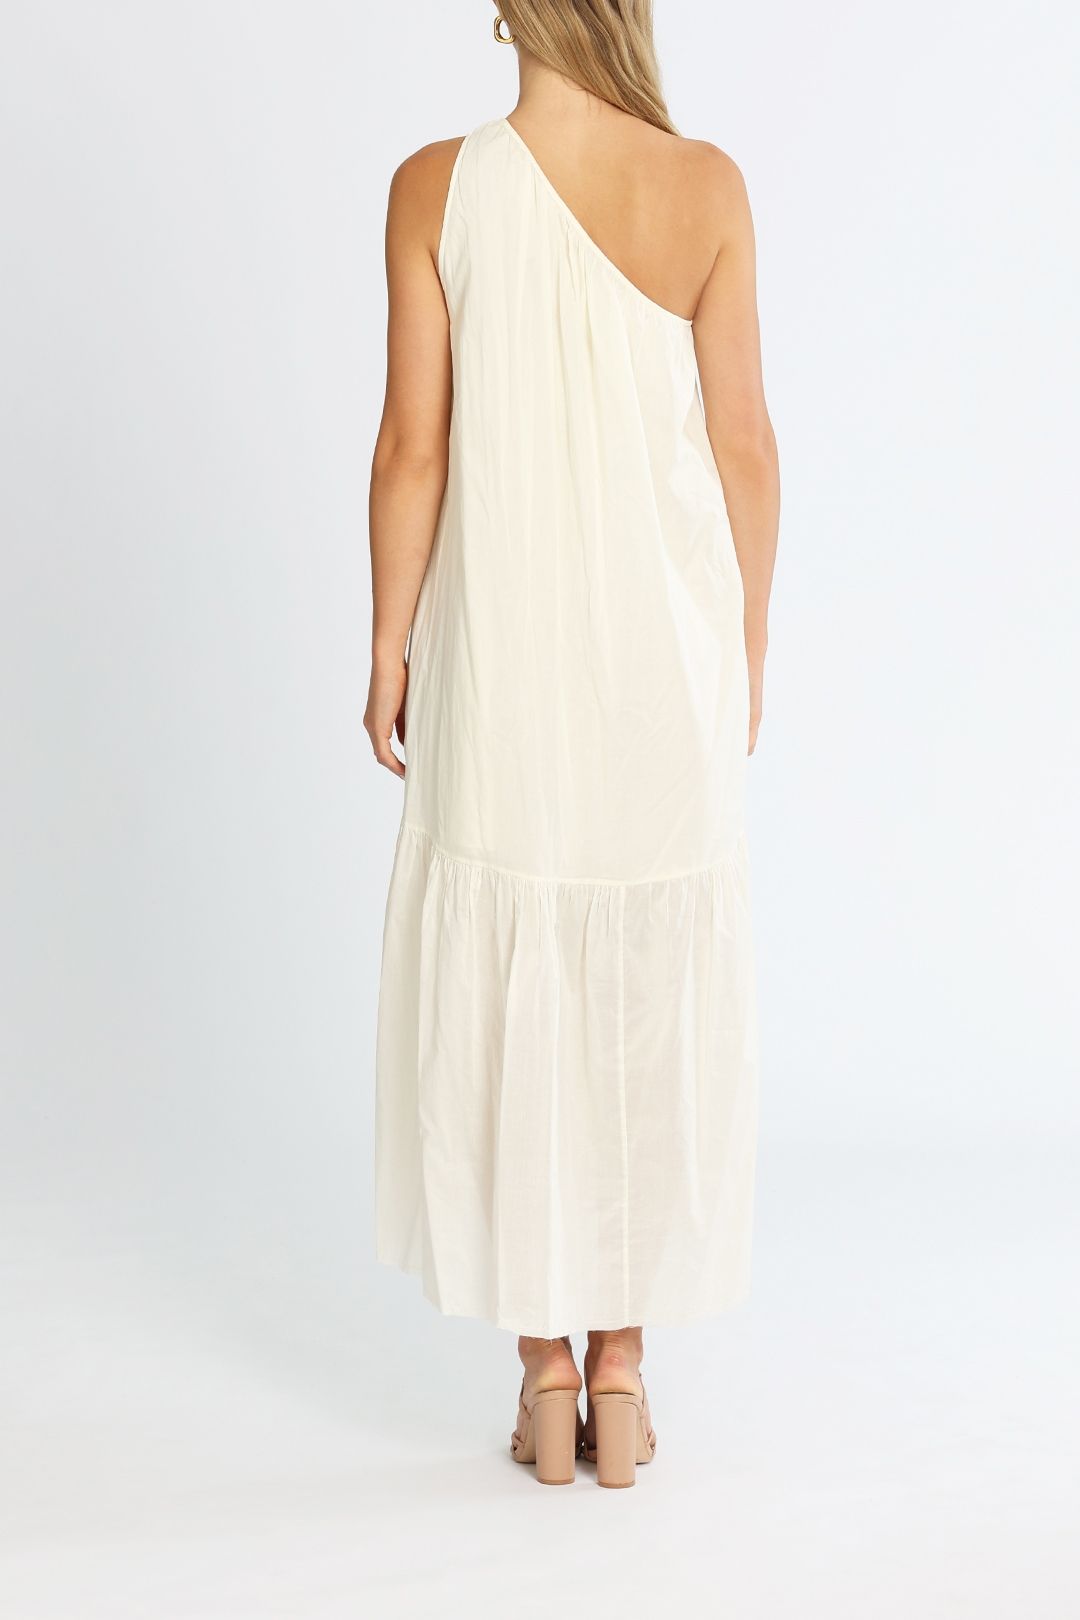 JAC + JACK Coupe Off The Shoulder Maxi Dress Ivory Tiered Skirt